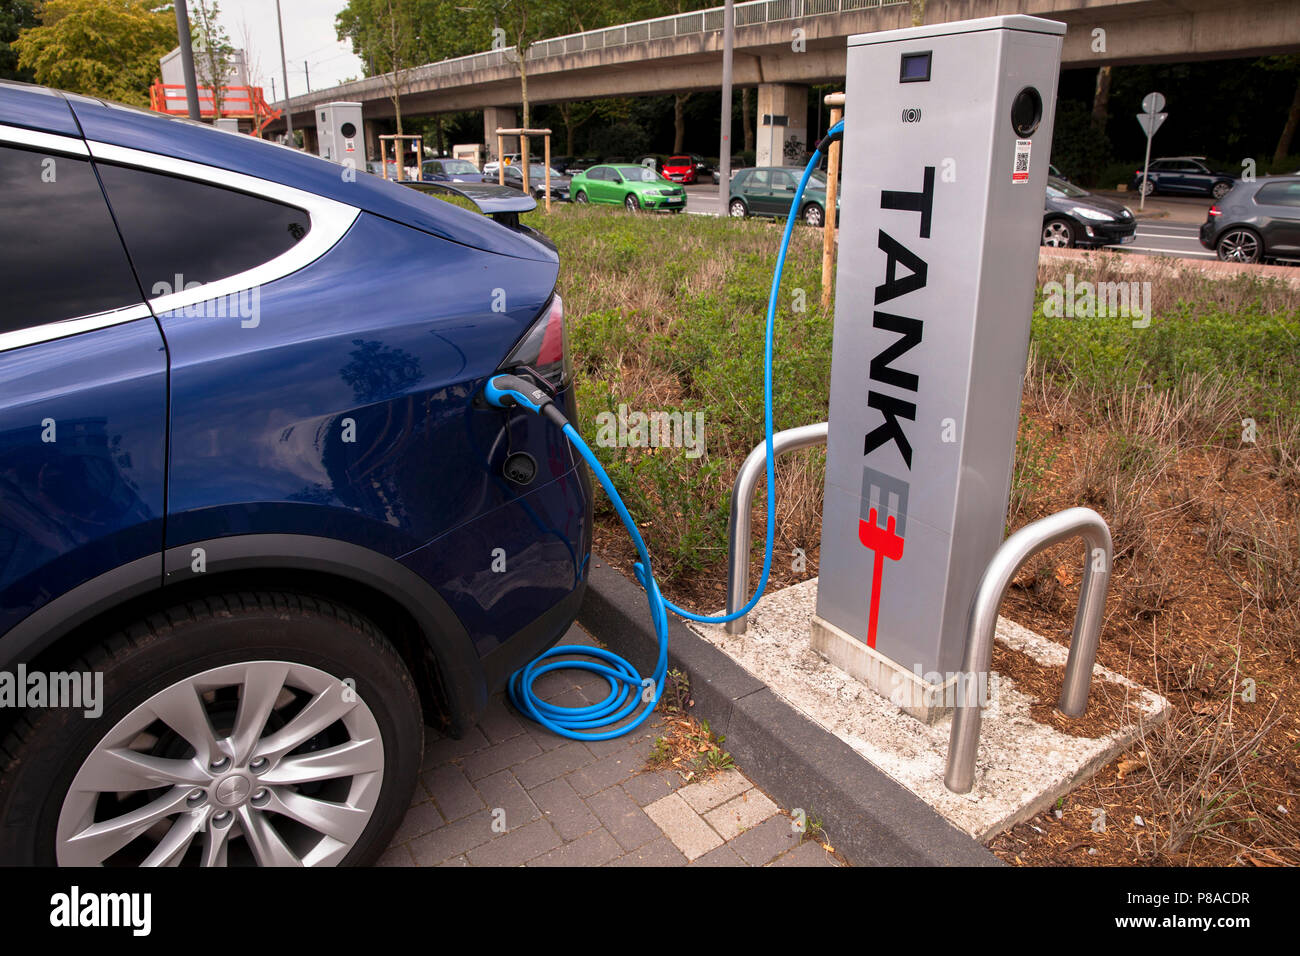 Tesla Model X at a charging station for electric cars, Cologne, Germany  Tesla Modell X an einer E-Tankstelle/Ladestation, Koeln, Deutschland Stock  Photo - Alamy